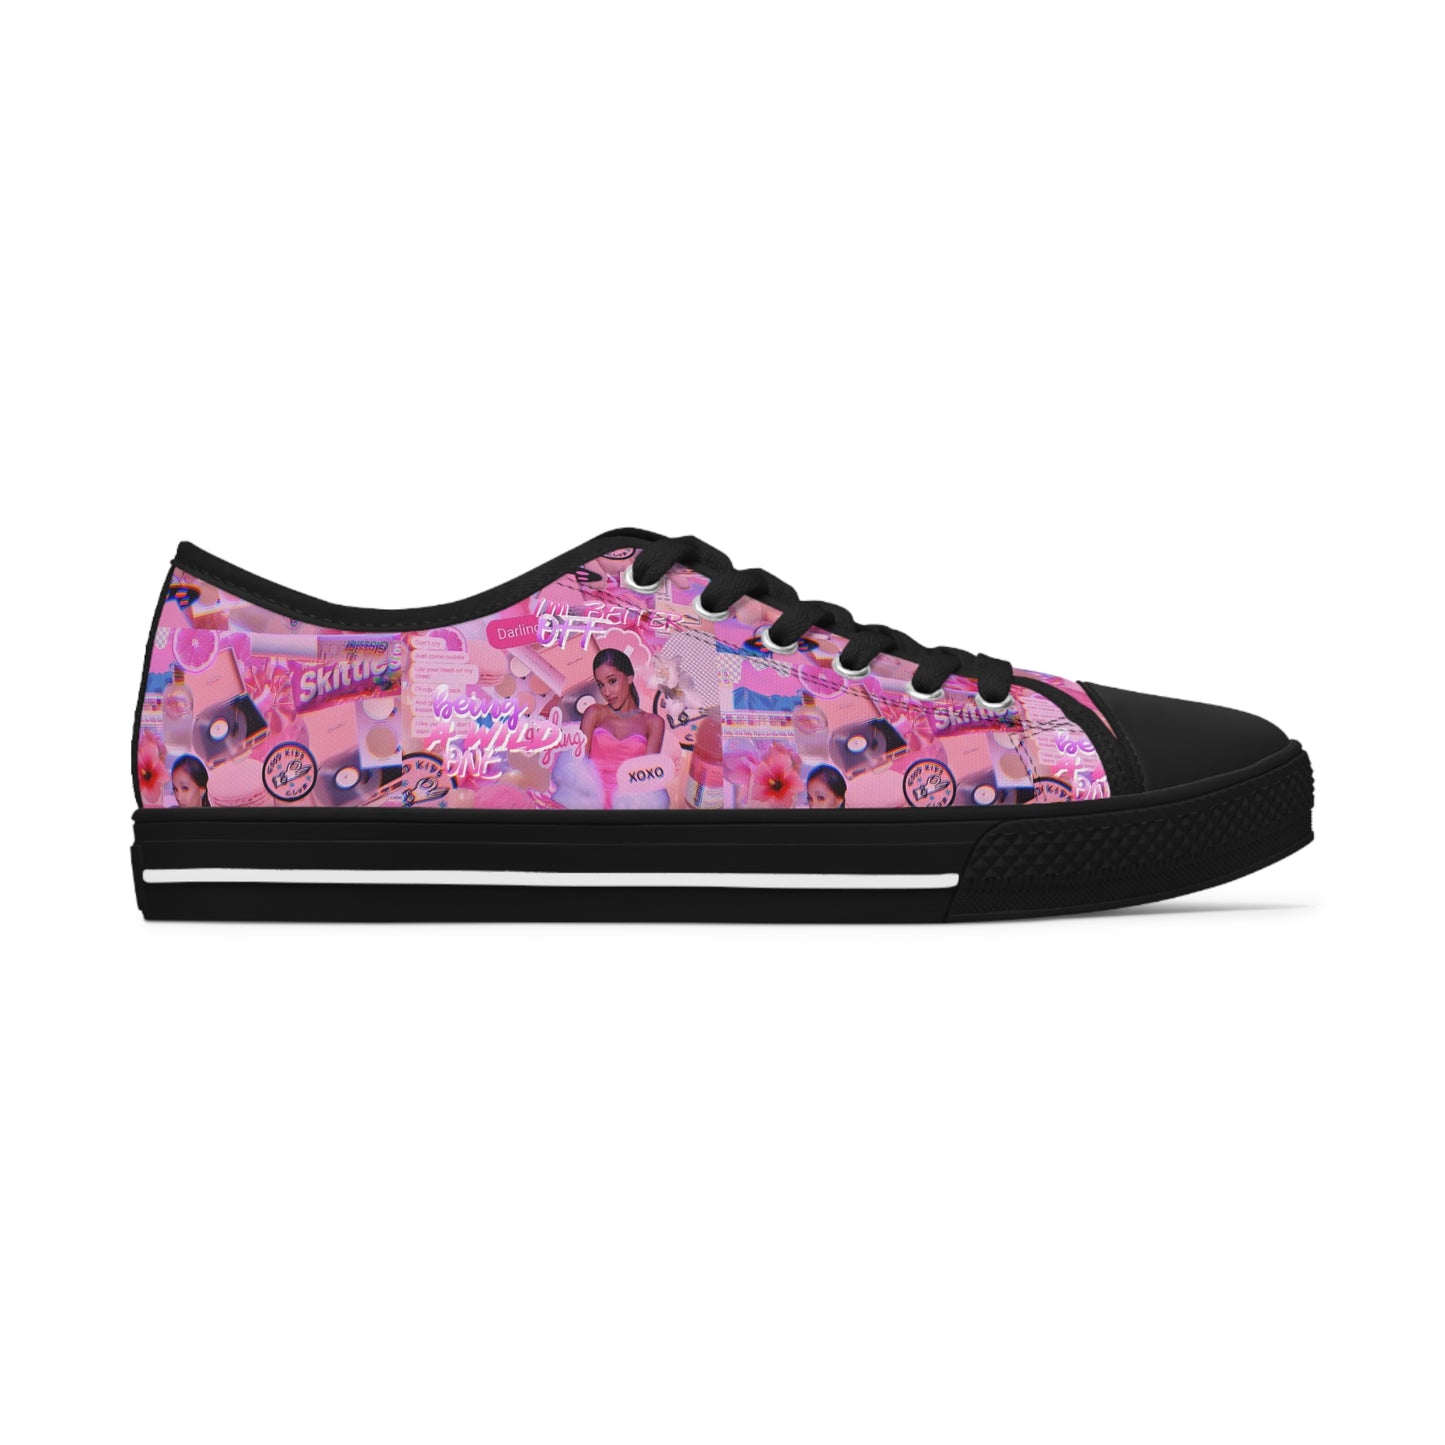 Ariana Grande Purple Vibes Collage Women's Low Top Sneakers